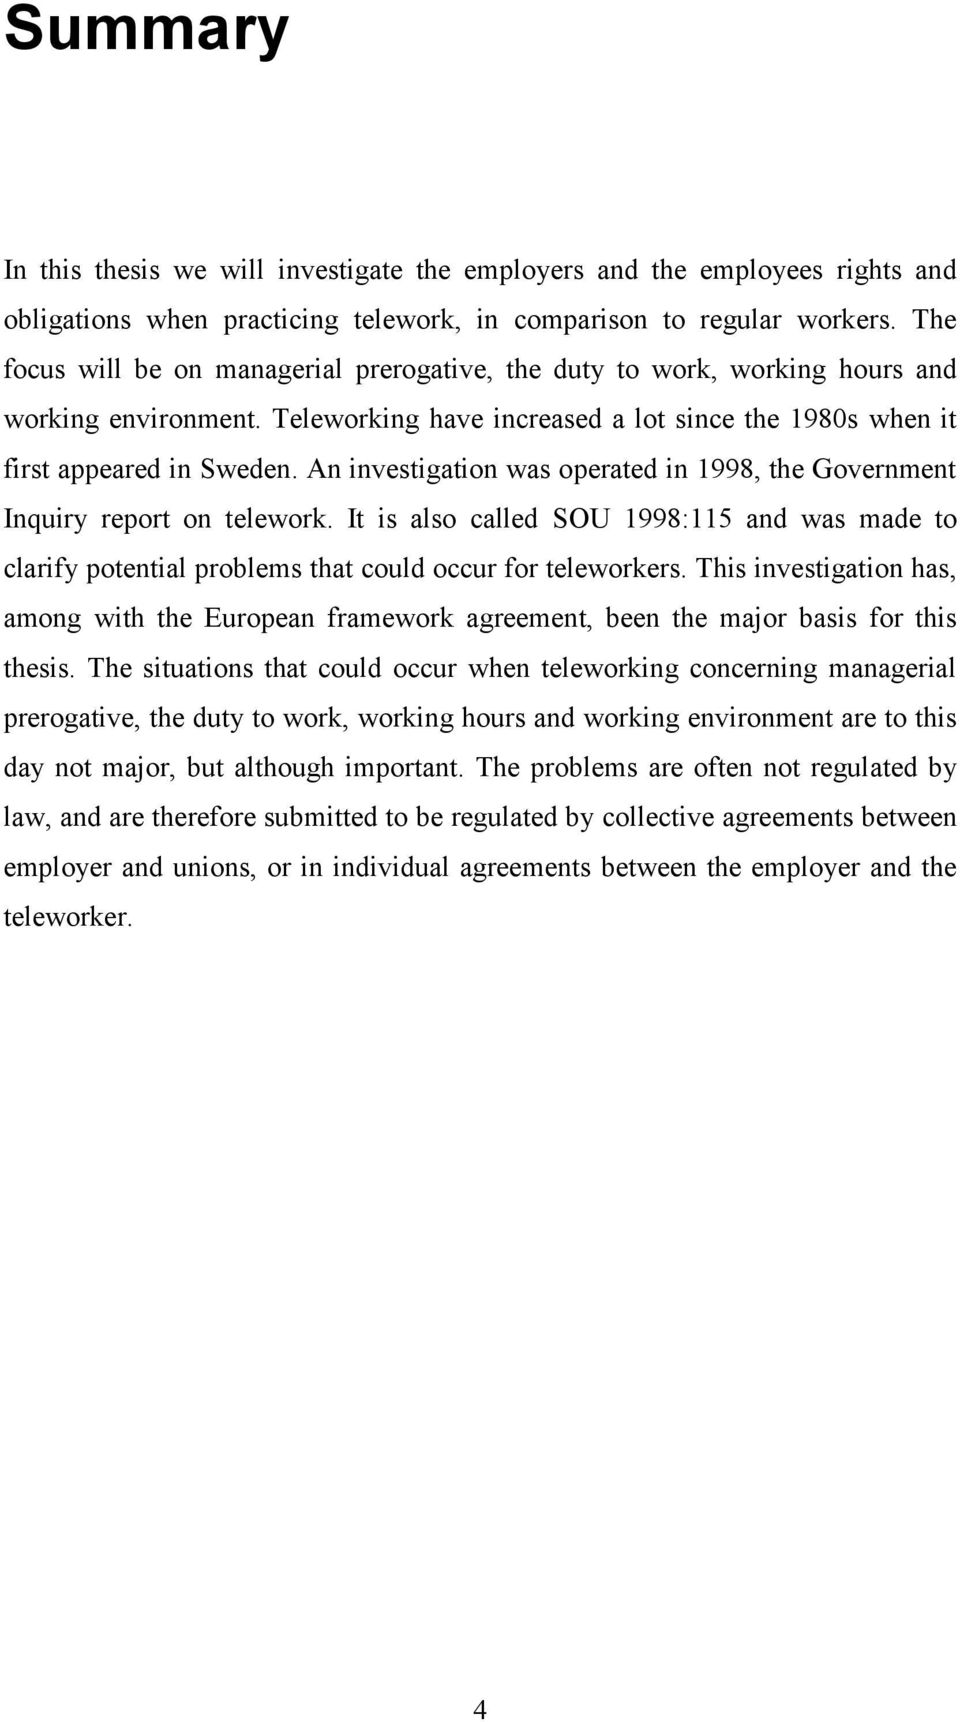 An investigation was operated in 1998, the Government Inquiry report on telework. It is also called SOU 1998:115 and was made to clarify potential problems that could occur for teleworkers.